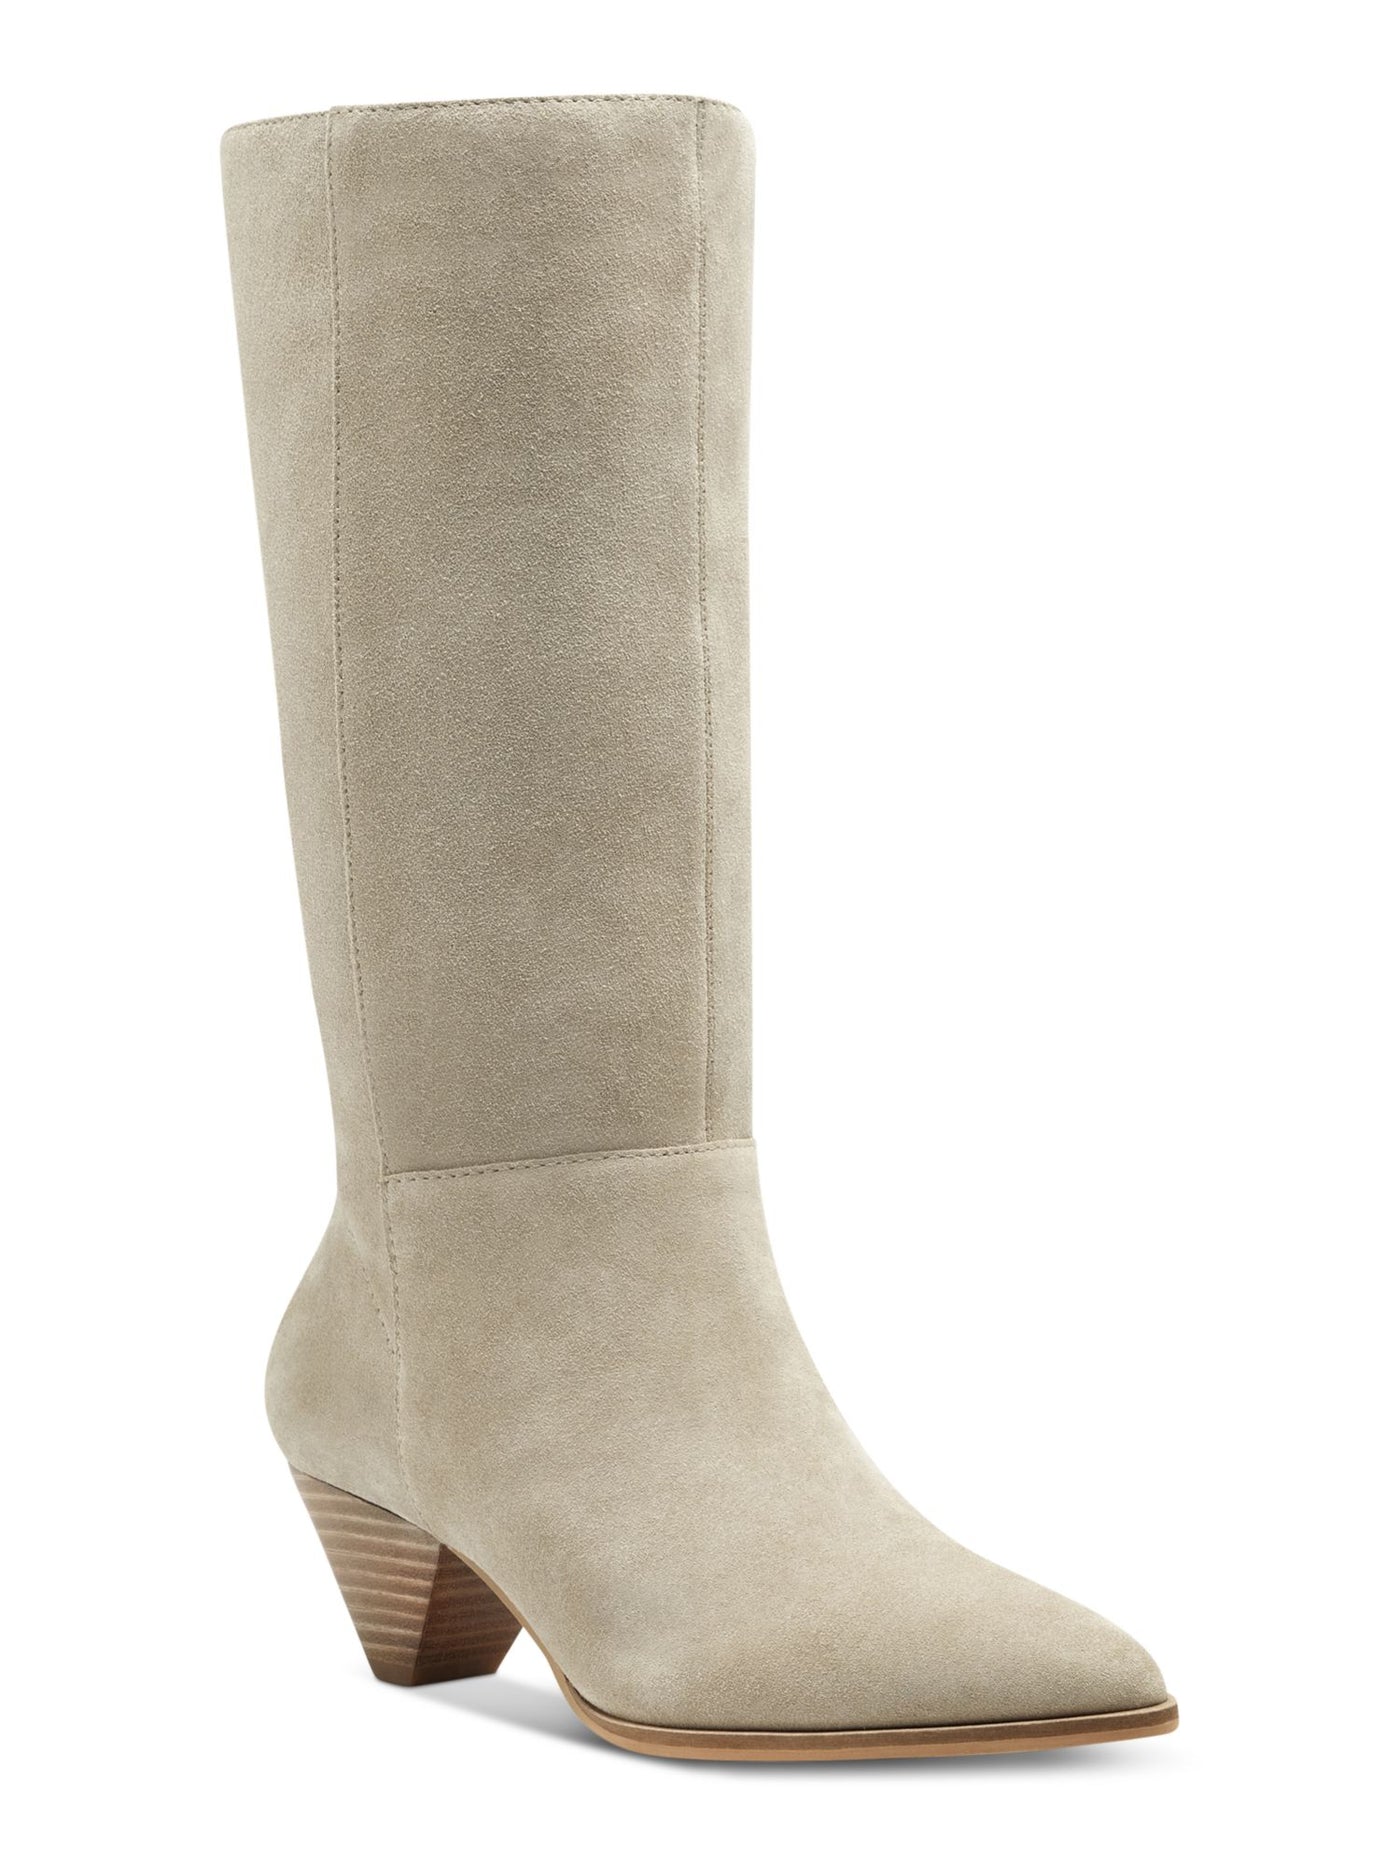 LUCKY BRAND Womens Beige Cushioned Pointed Toe Cone Heel Heeled Boots 7